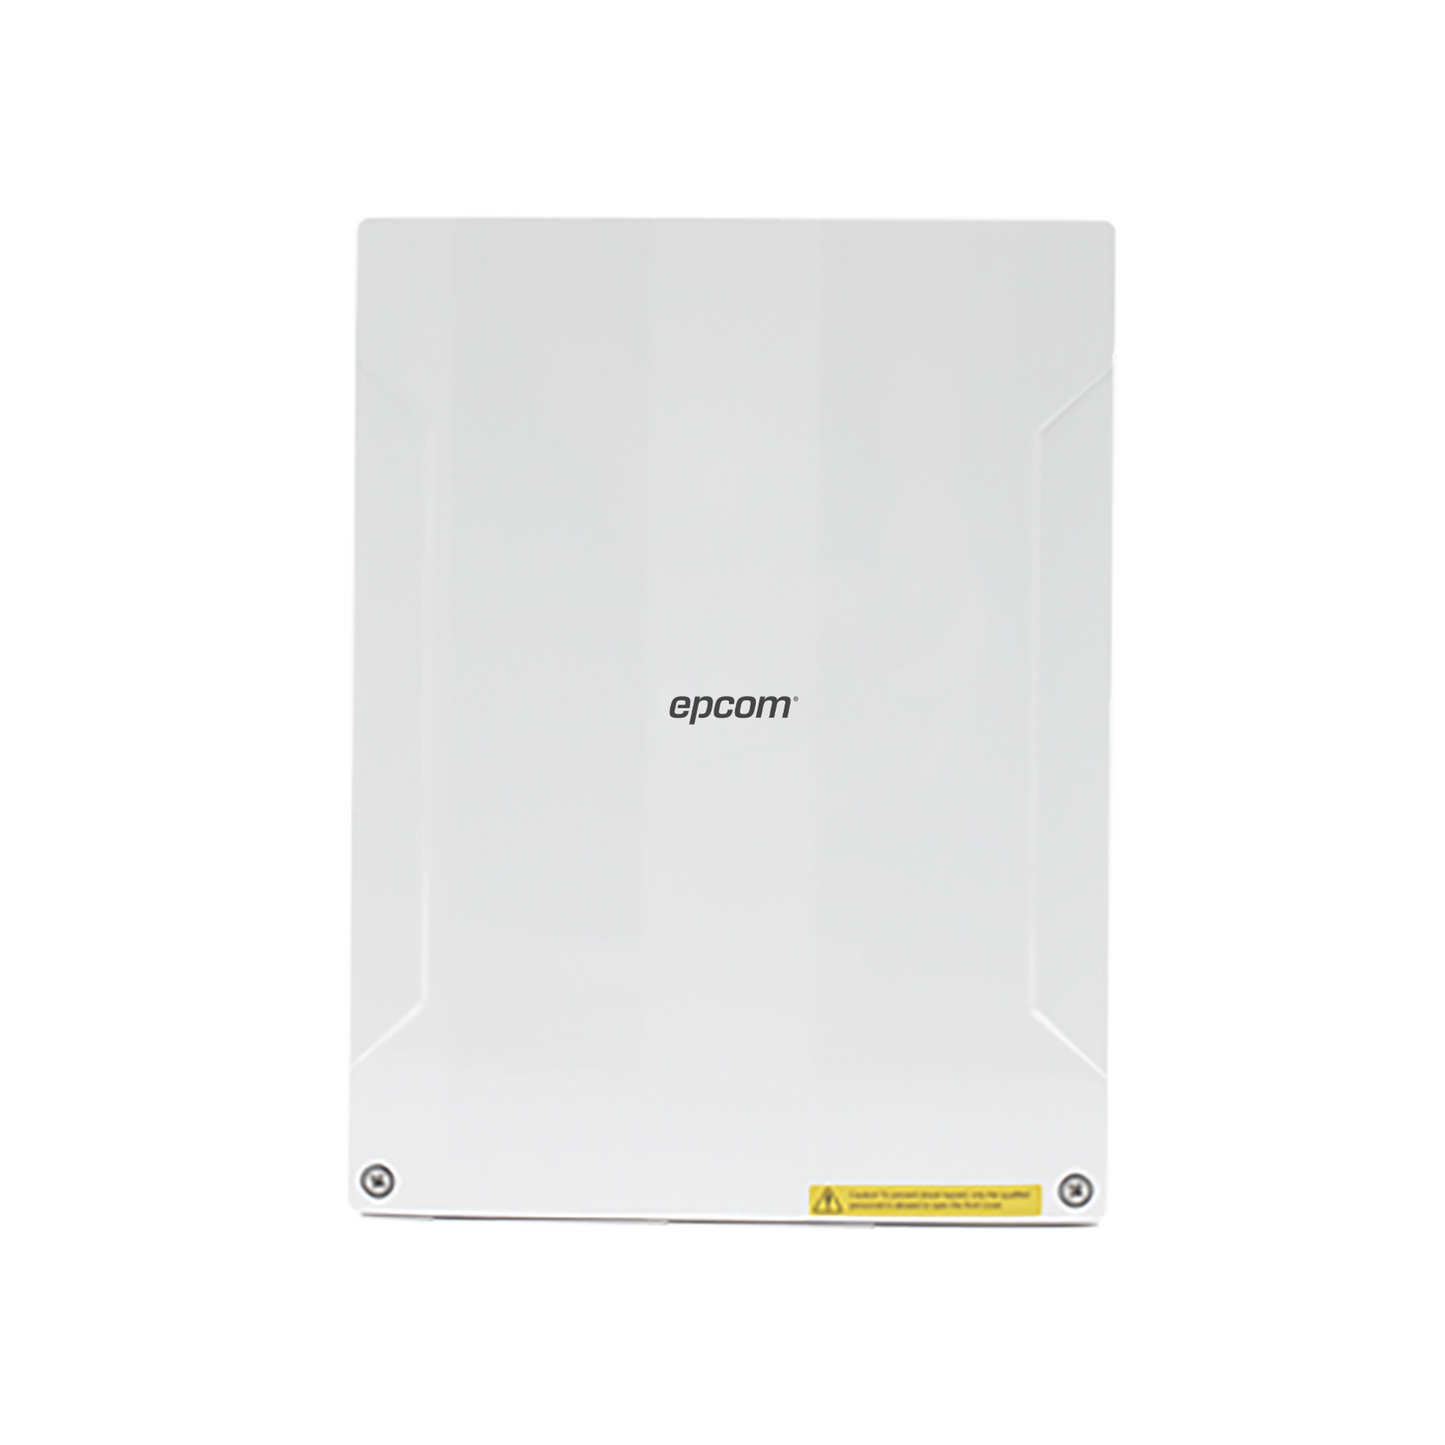 AX HYBRID PRO Alarm Panel / Wi-Fi / 8 Zones Wired Directly to the Panel / 56 Expandable Zones: Wireless or Wired Through Modules / Supports Backup Battery Integration / 32 Partitions (Areas).